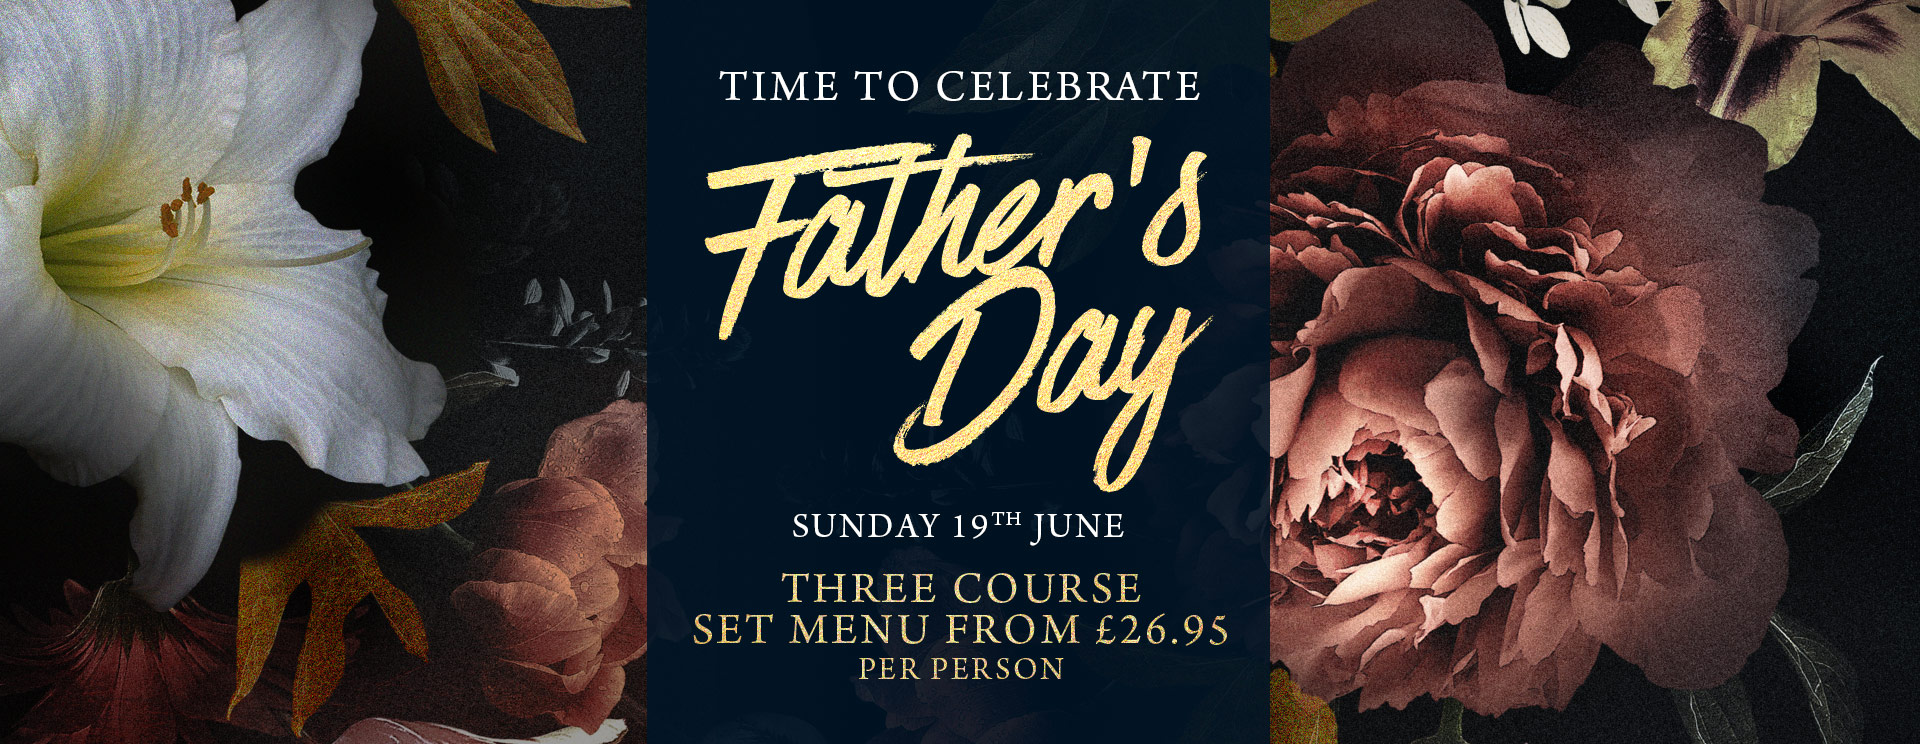 Fathers Day at The Prince of Wales